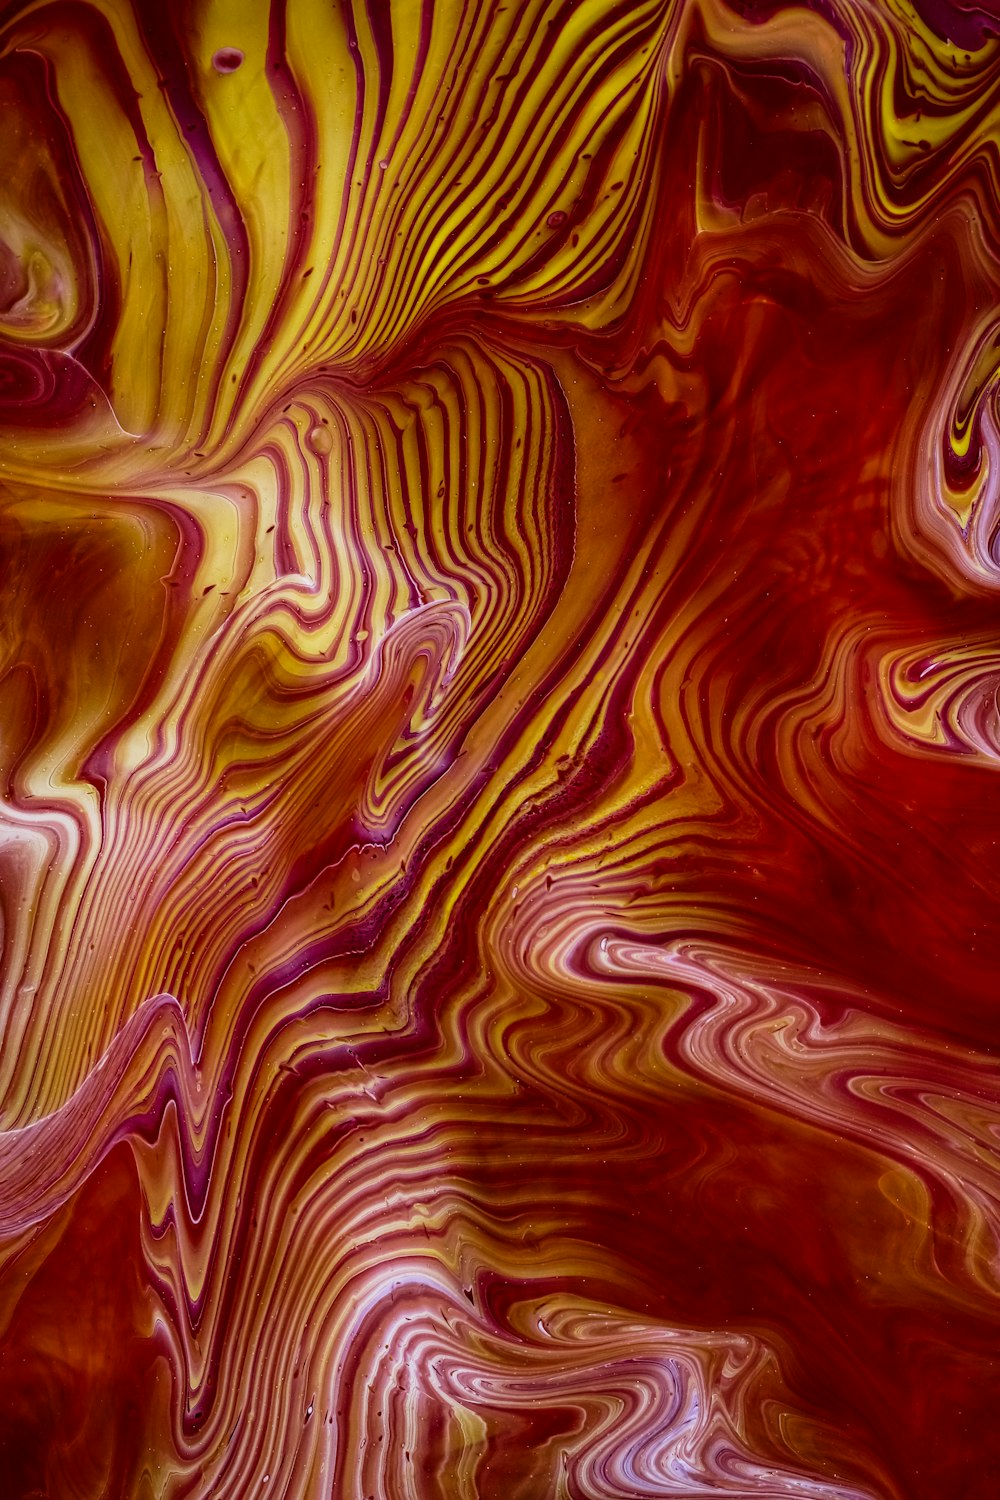 a close up of a red and yellow swirl